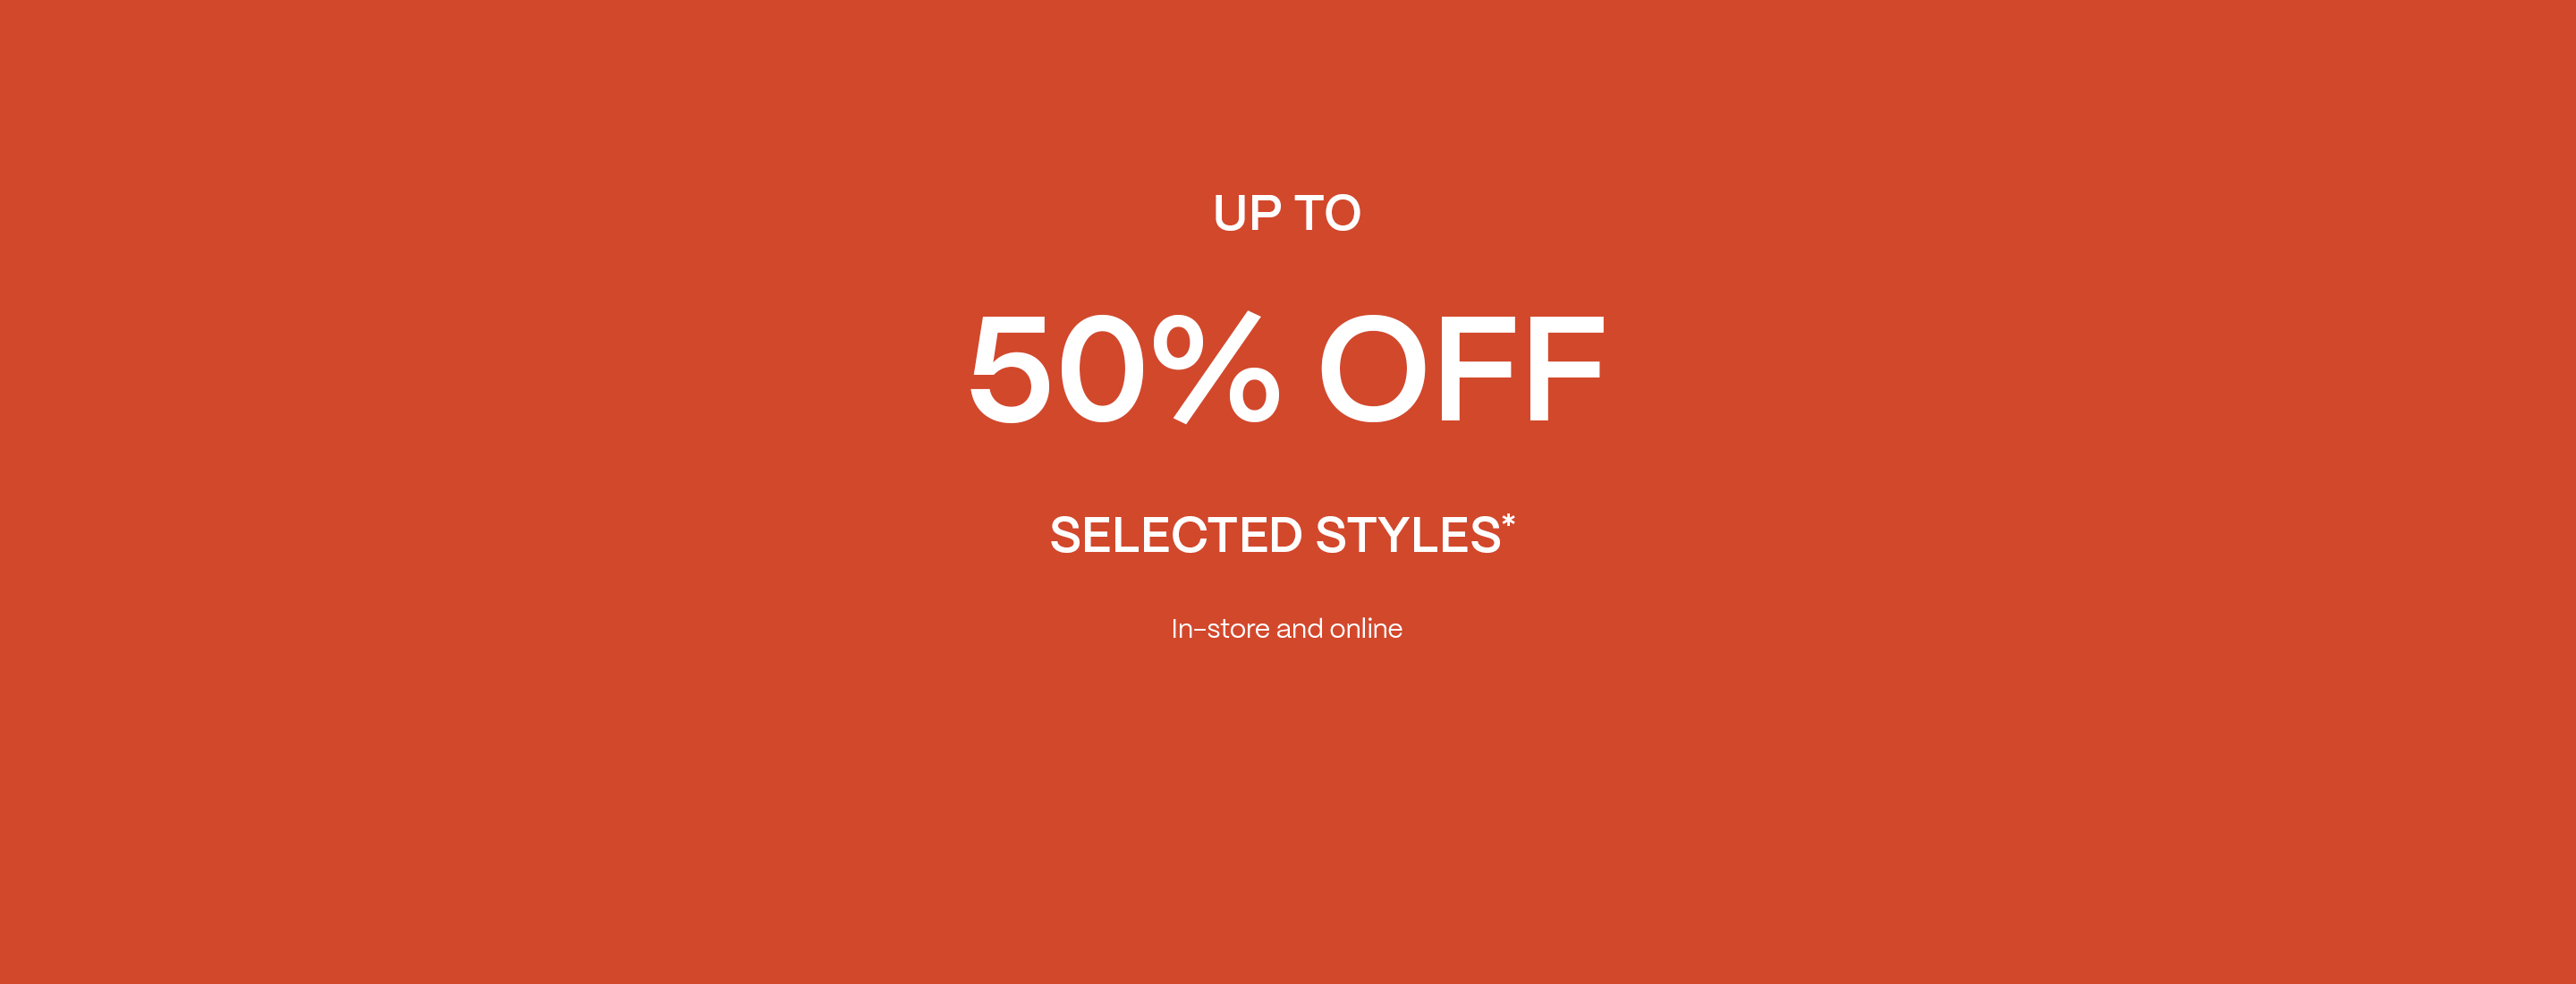 Up To 50% OFF Selected Styles* - Shop Now